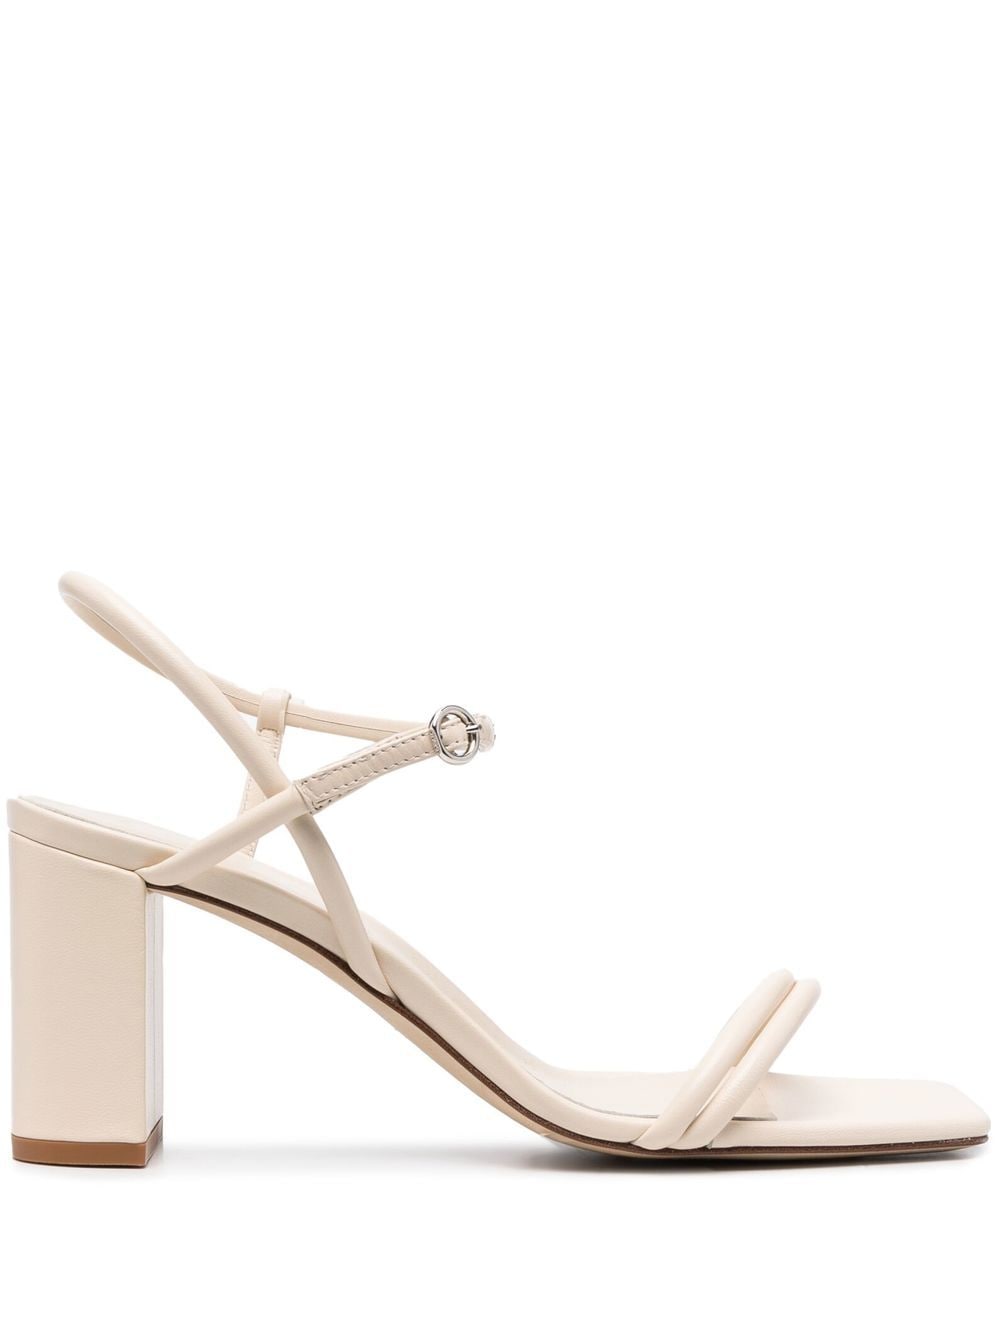 Aeyde Strappy 85mm Leather Sandals - Farfetch